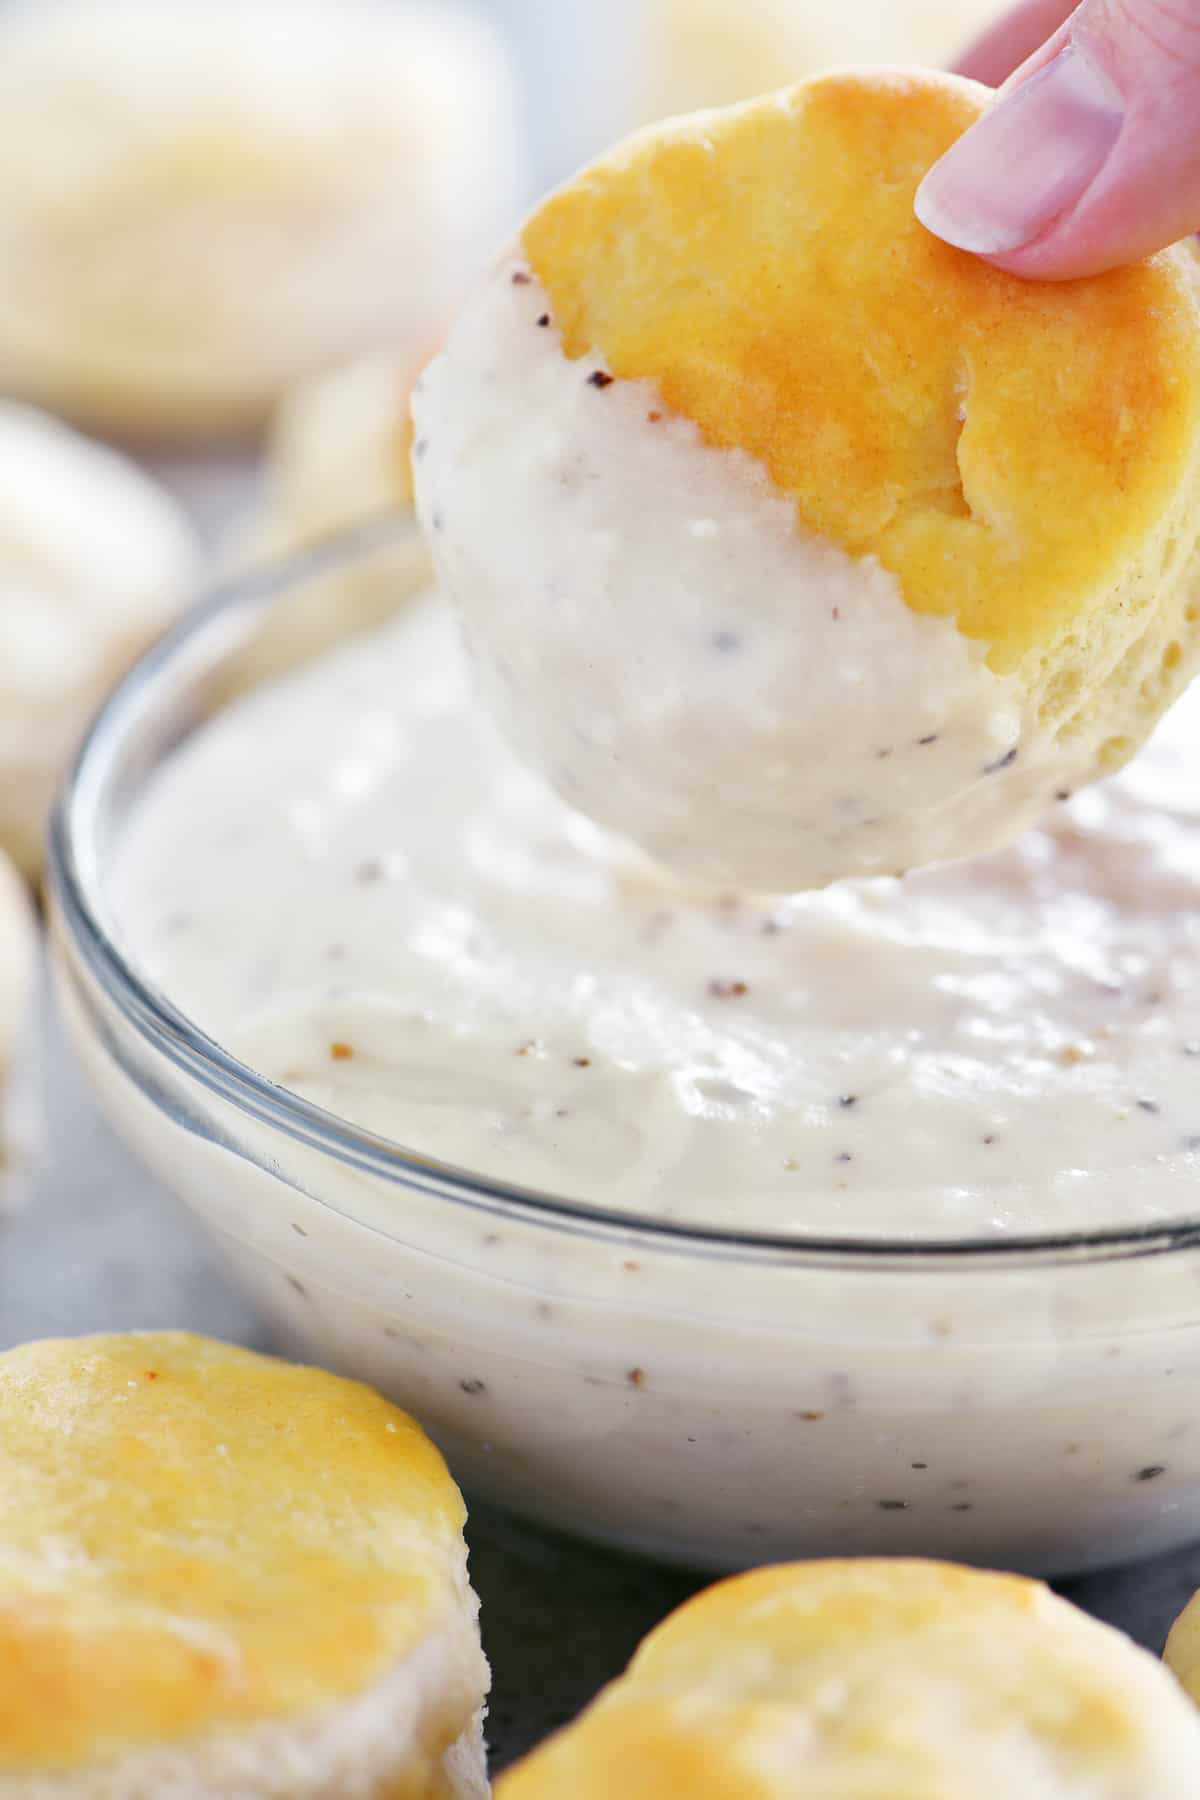 mini biscuit dipped in bowl of white gravy